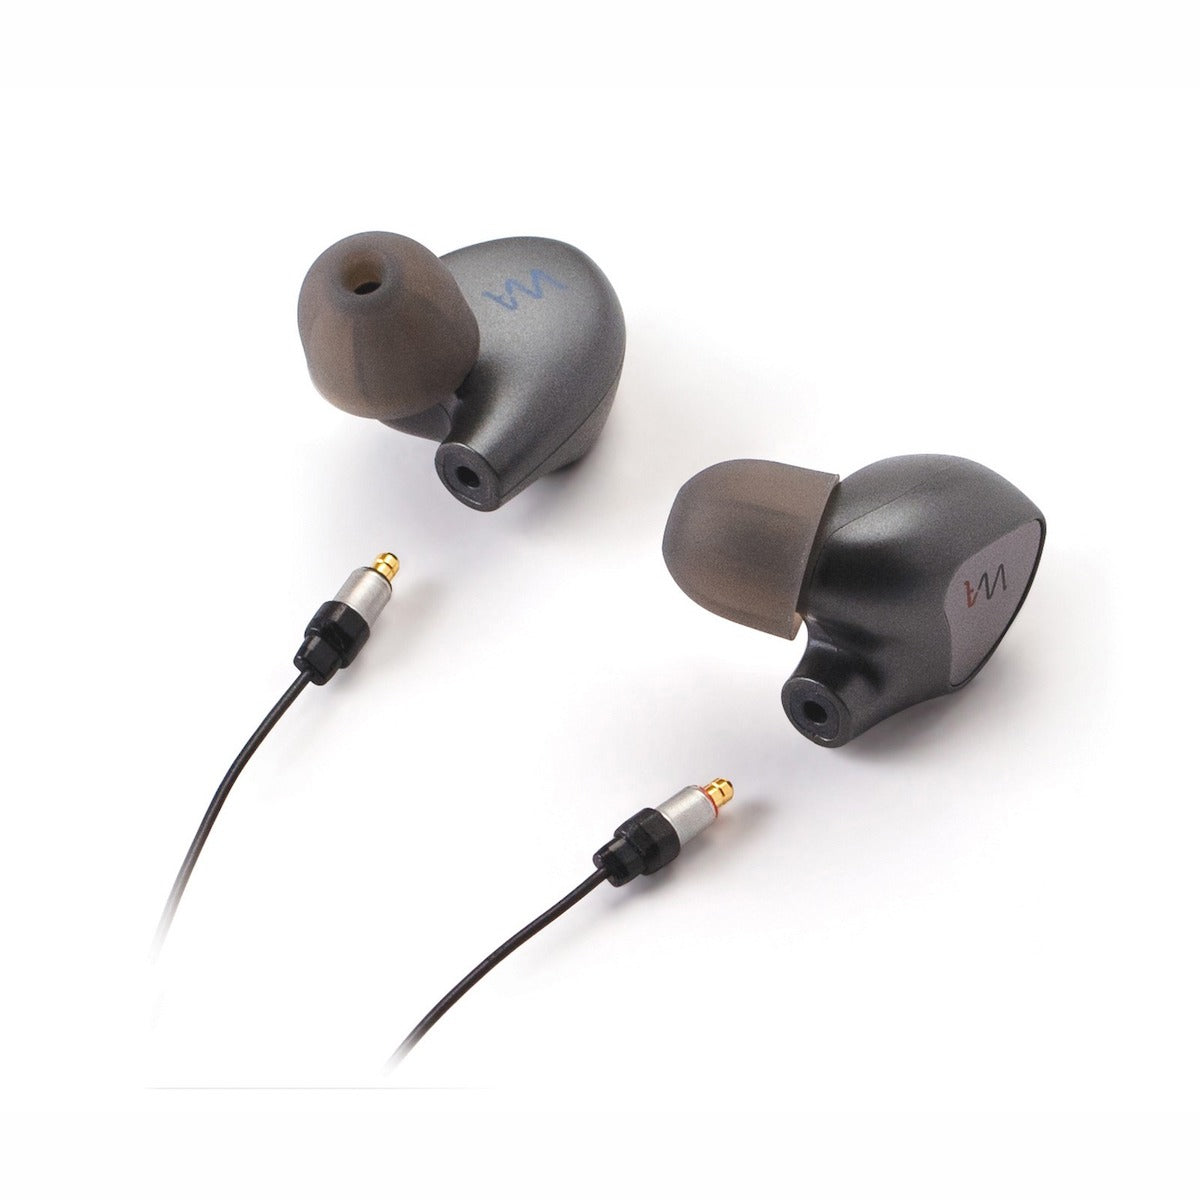 Westone MACH 20 - 2-driver Universal In-ear Monitors, T2 Connector